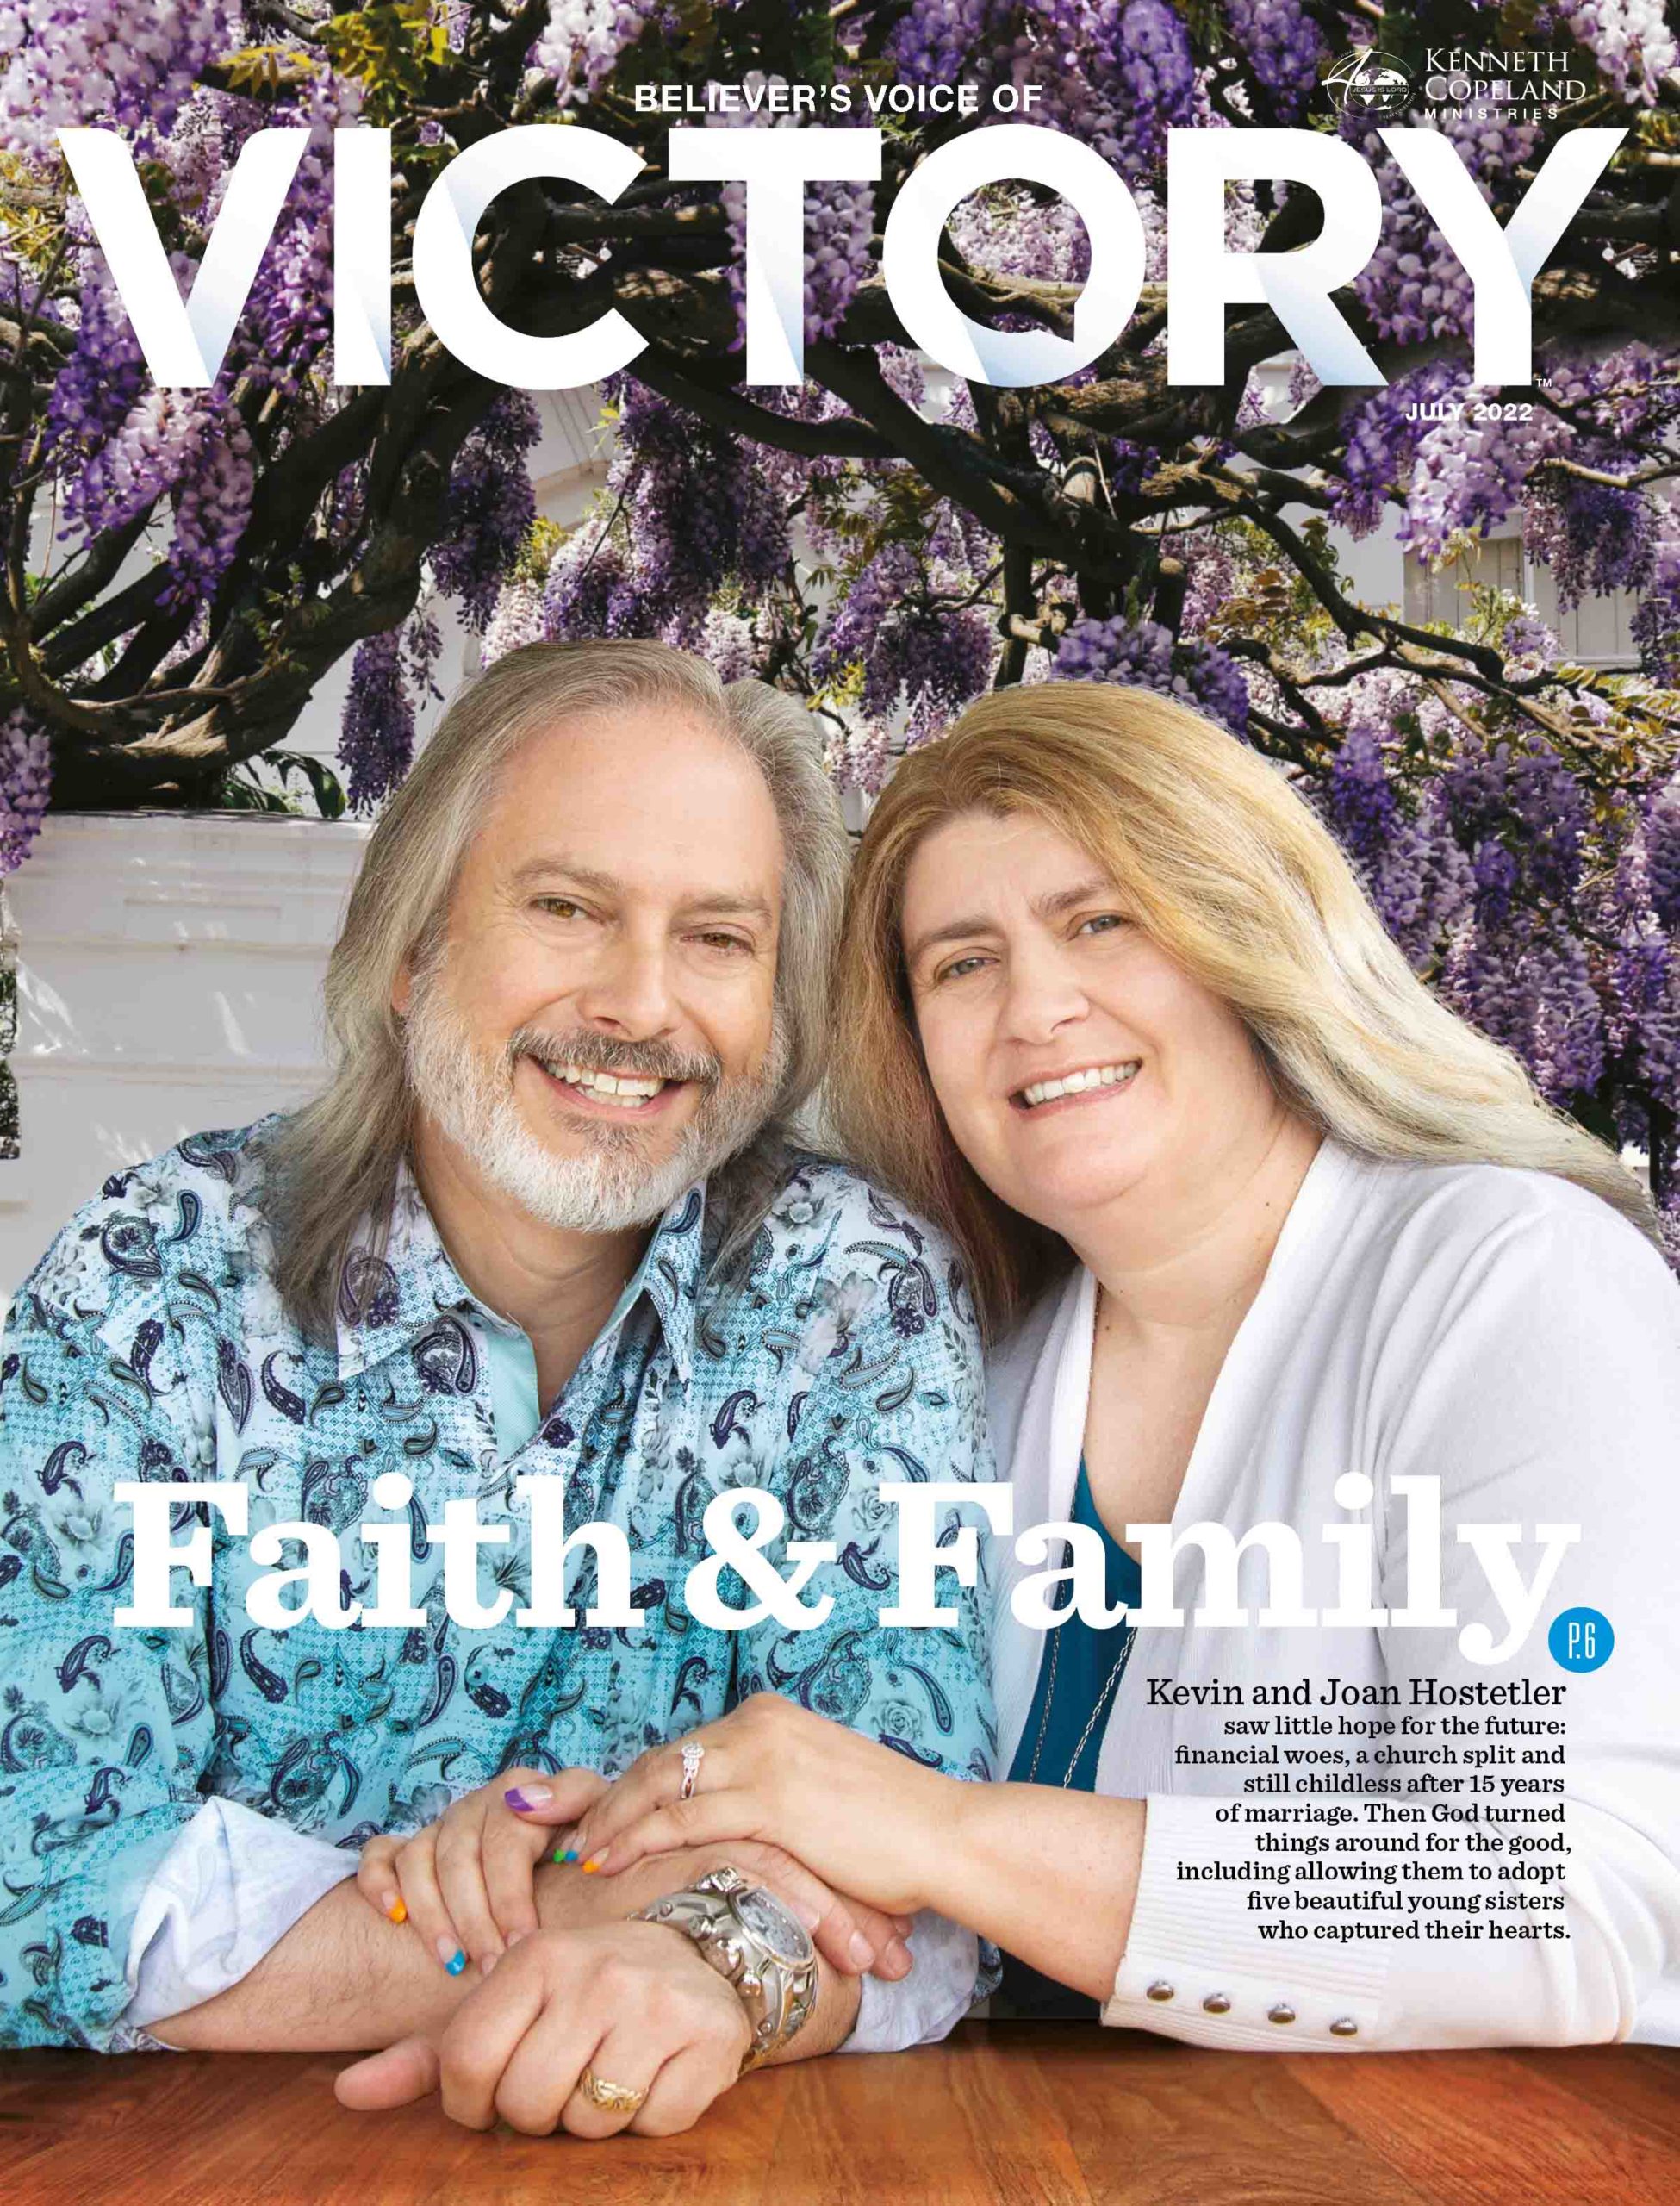 Victory Magazine subscription link image